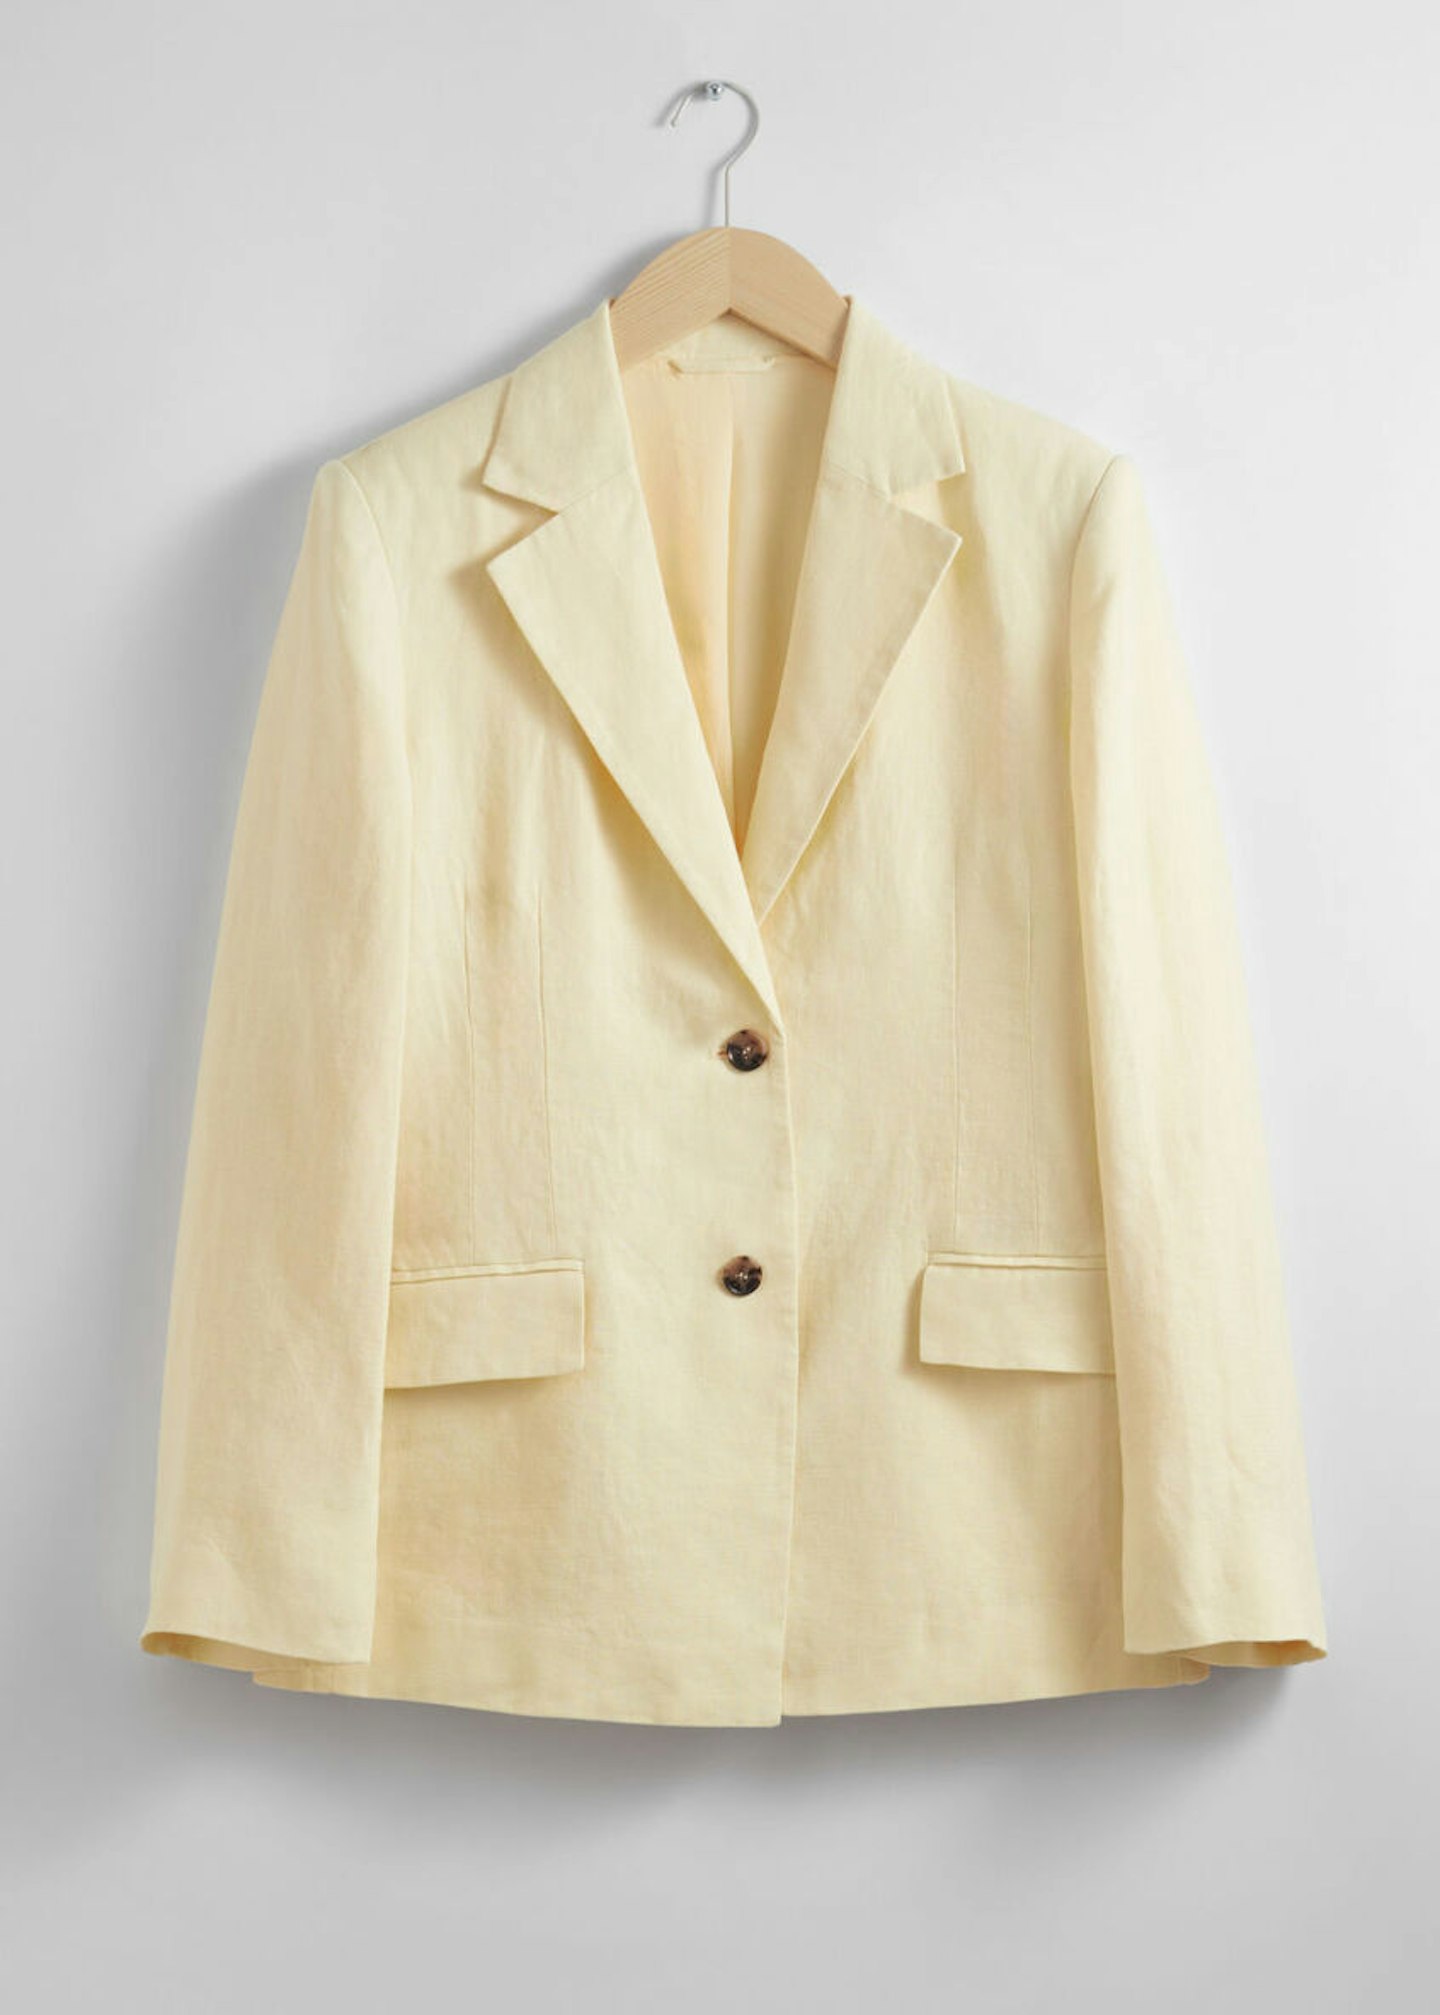 & Other Stories, Fitted Linen Blazer